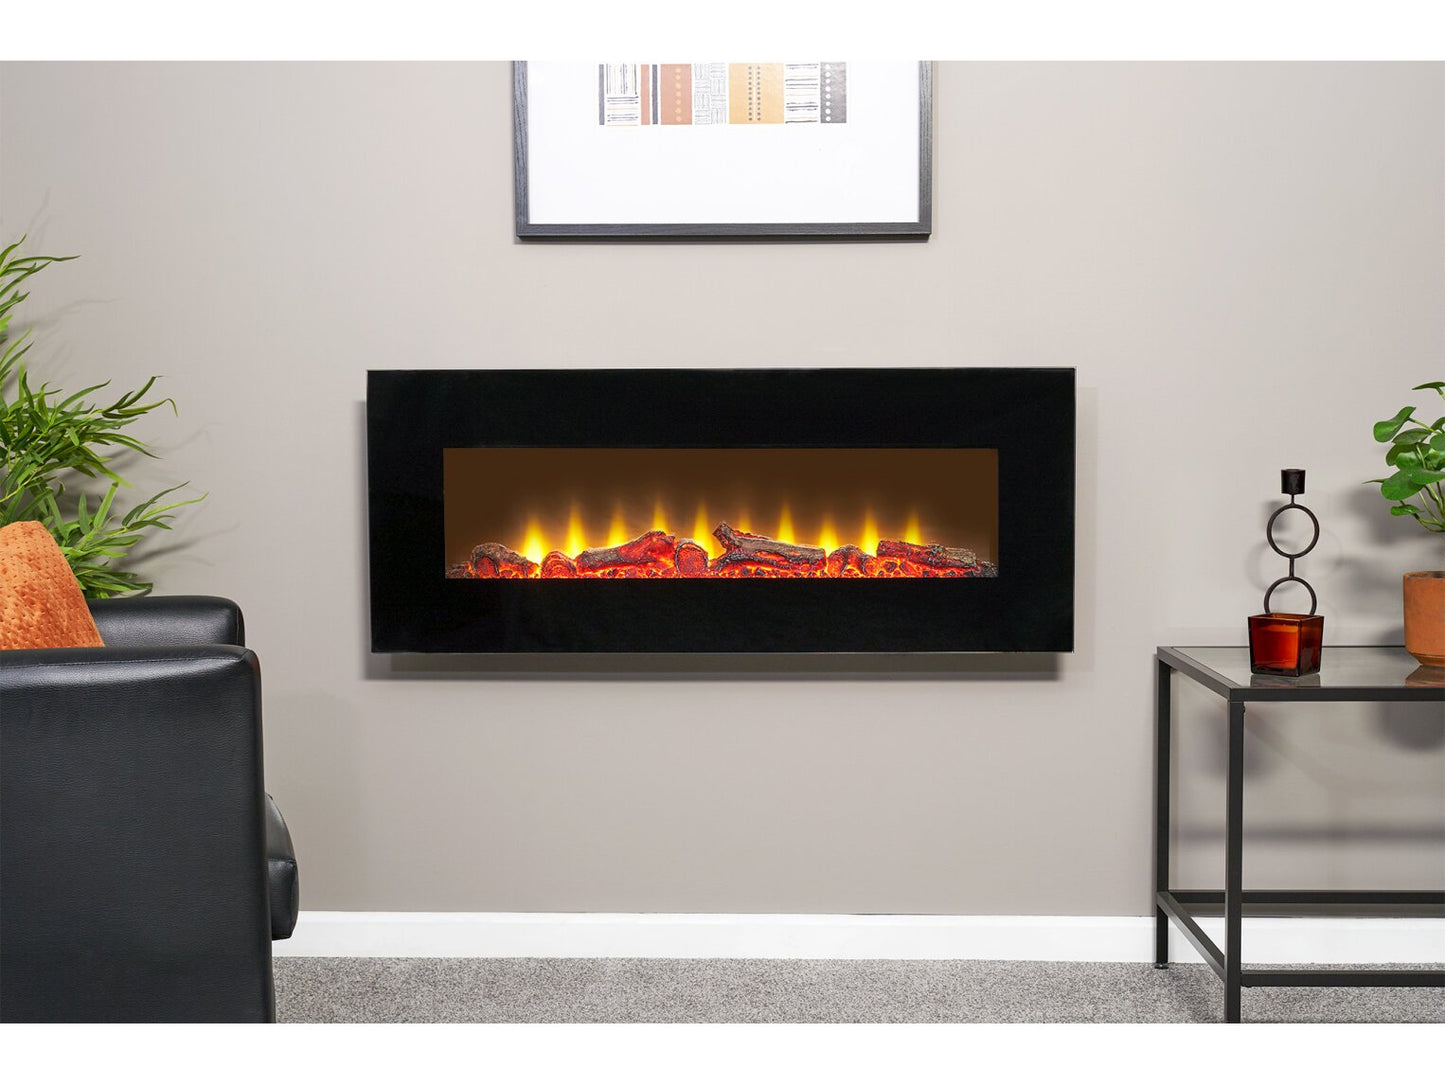 Adam Electric Wall Mounted Fire Sureflame WM-9331 with Remote 42 Inch 23627 Black